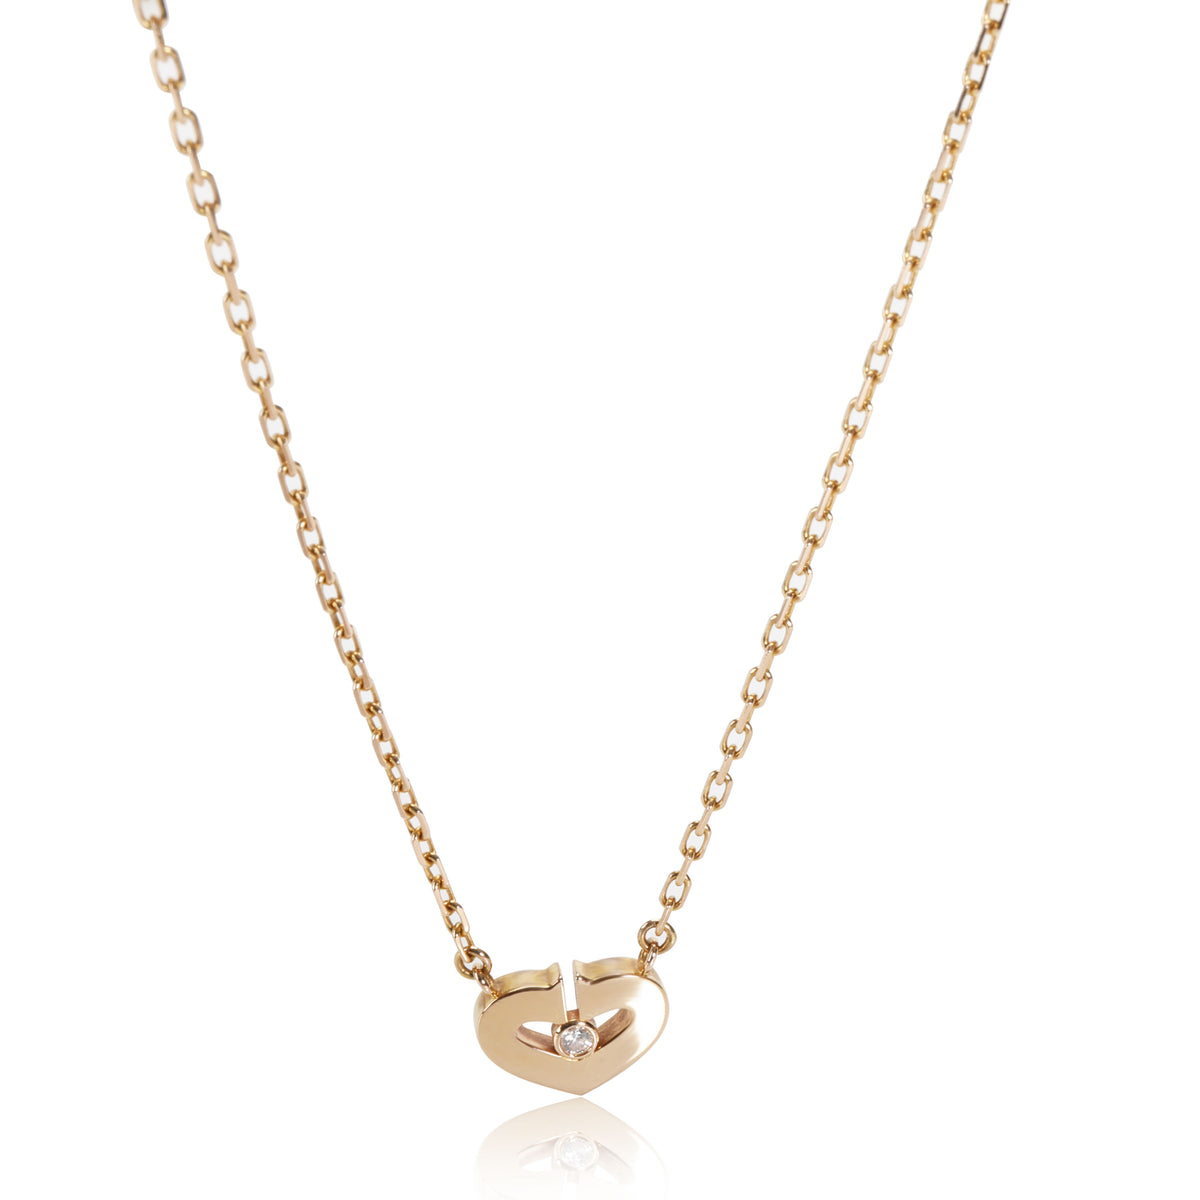 Cartier Hearts & Symbols Diamond Necklace in 18K Pink Gold 0.01 CTW